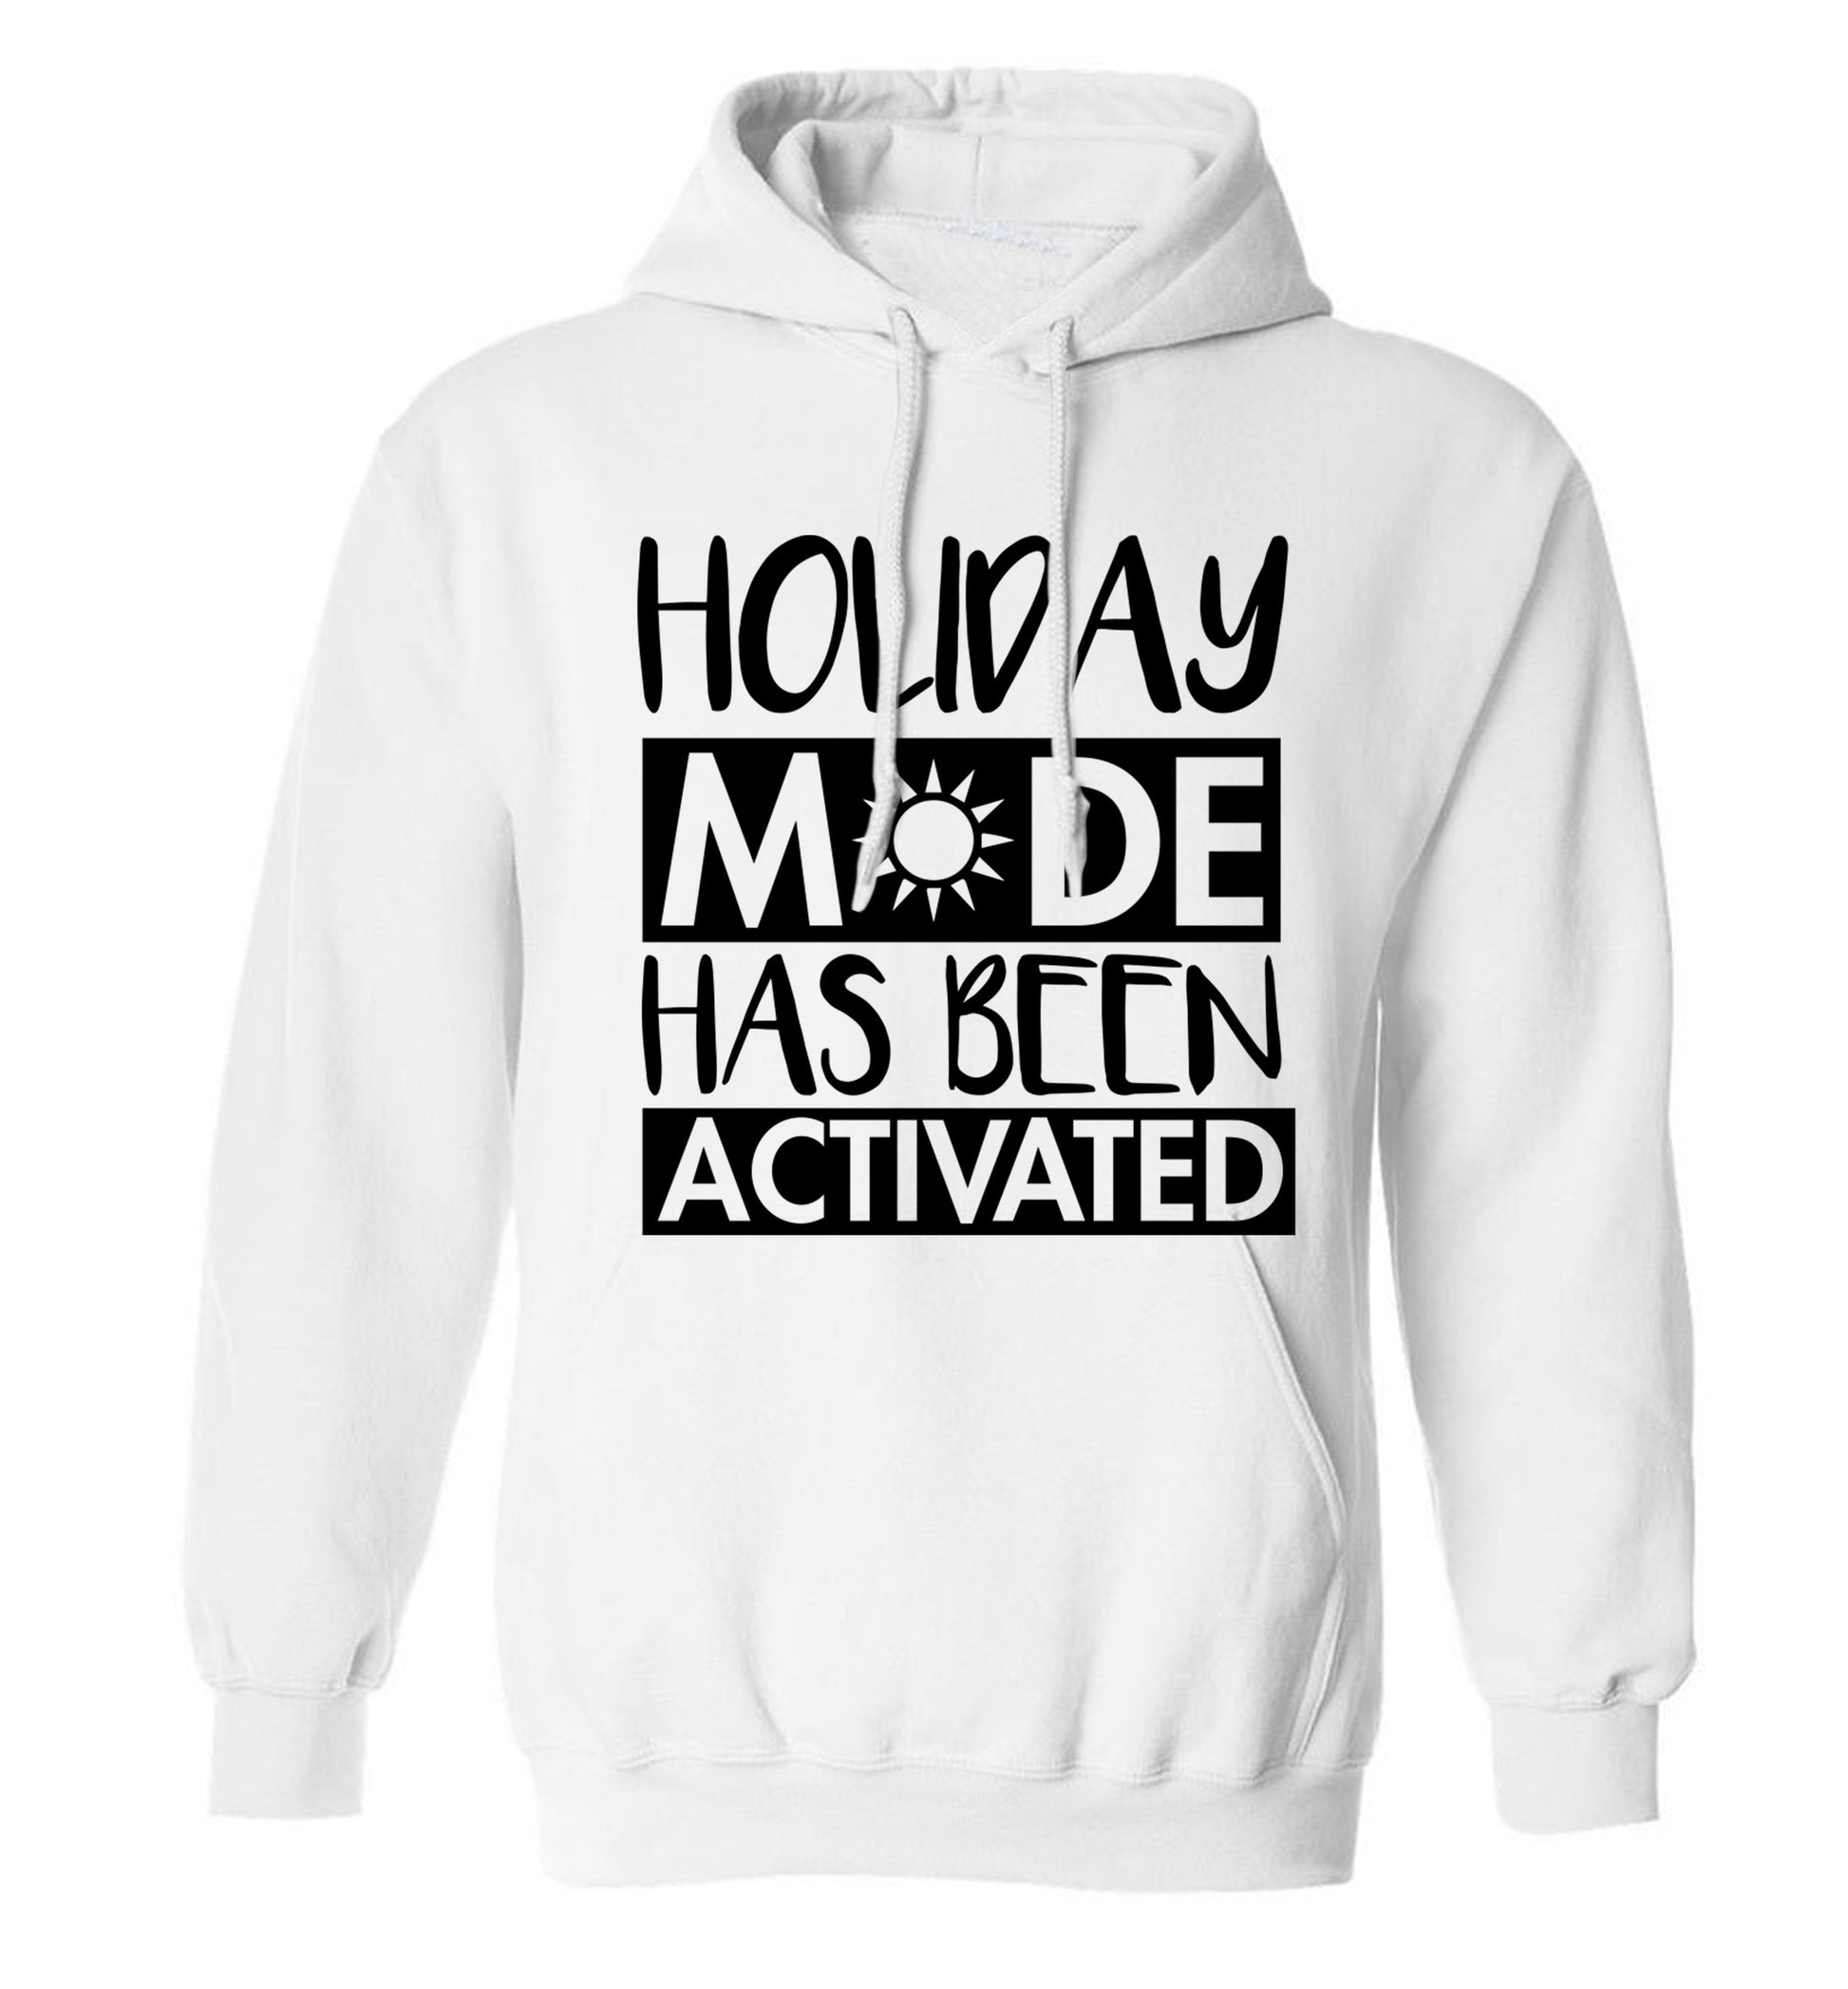 Holiday mode has been activated adults unisex white hoodie 2XL